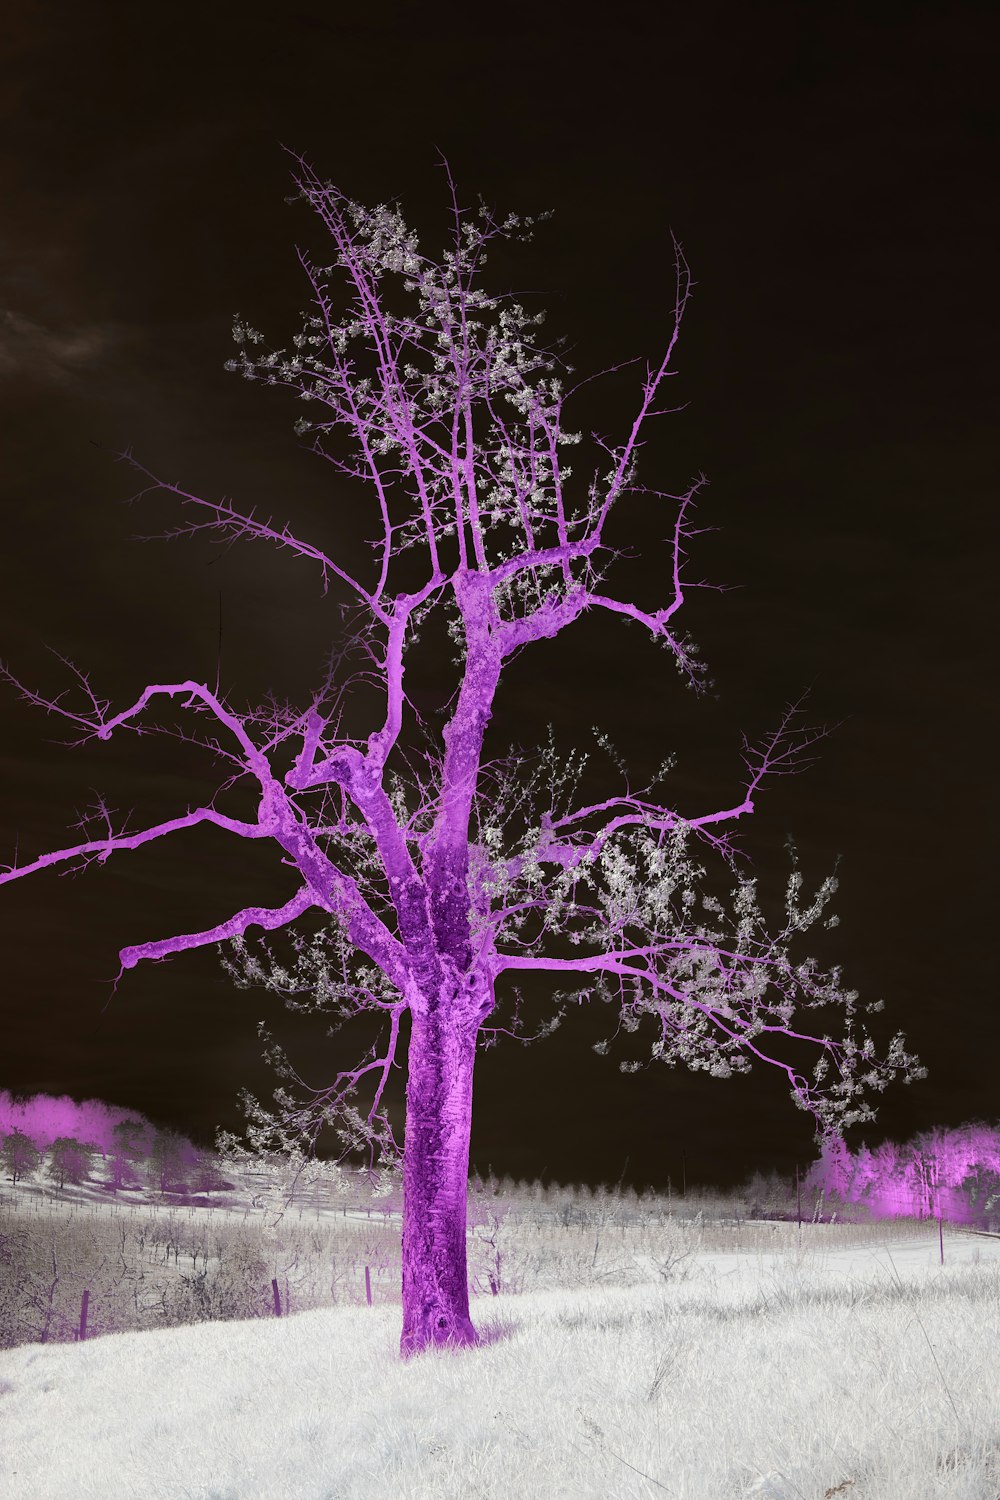 a purple tree in the middle of a snowy field